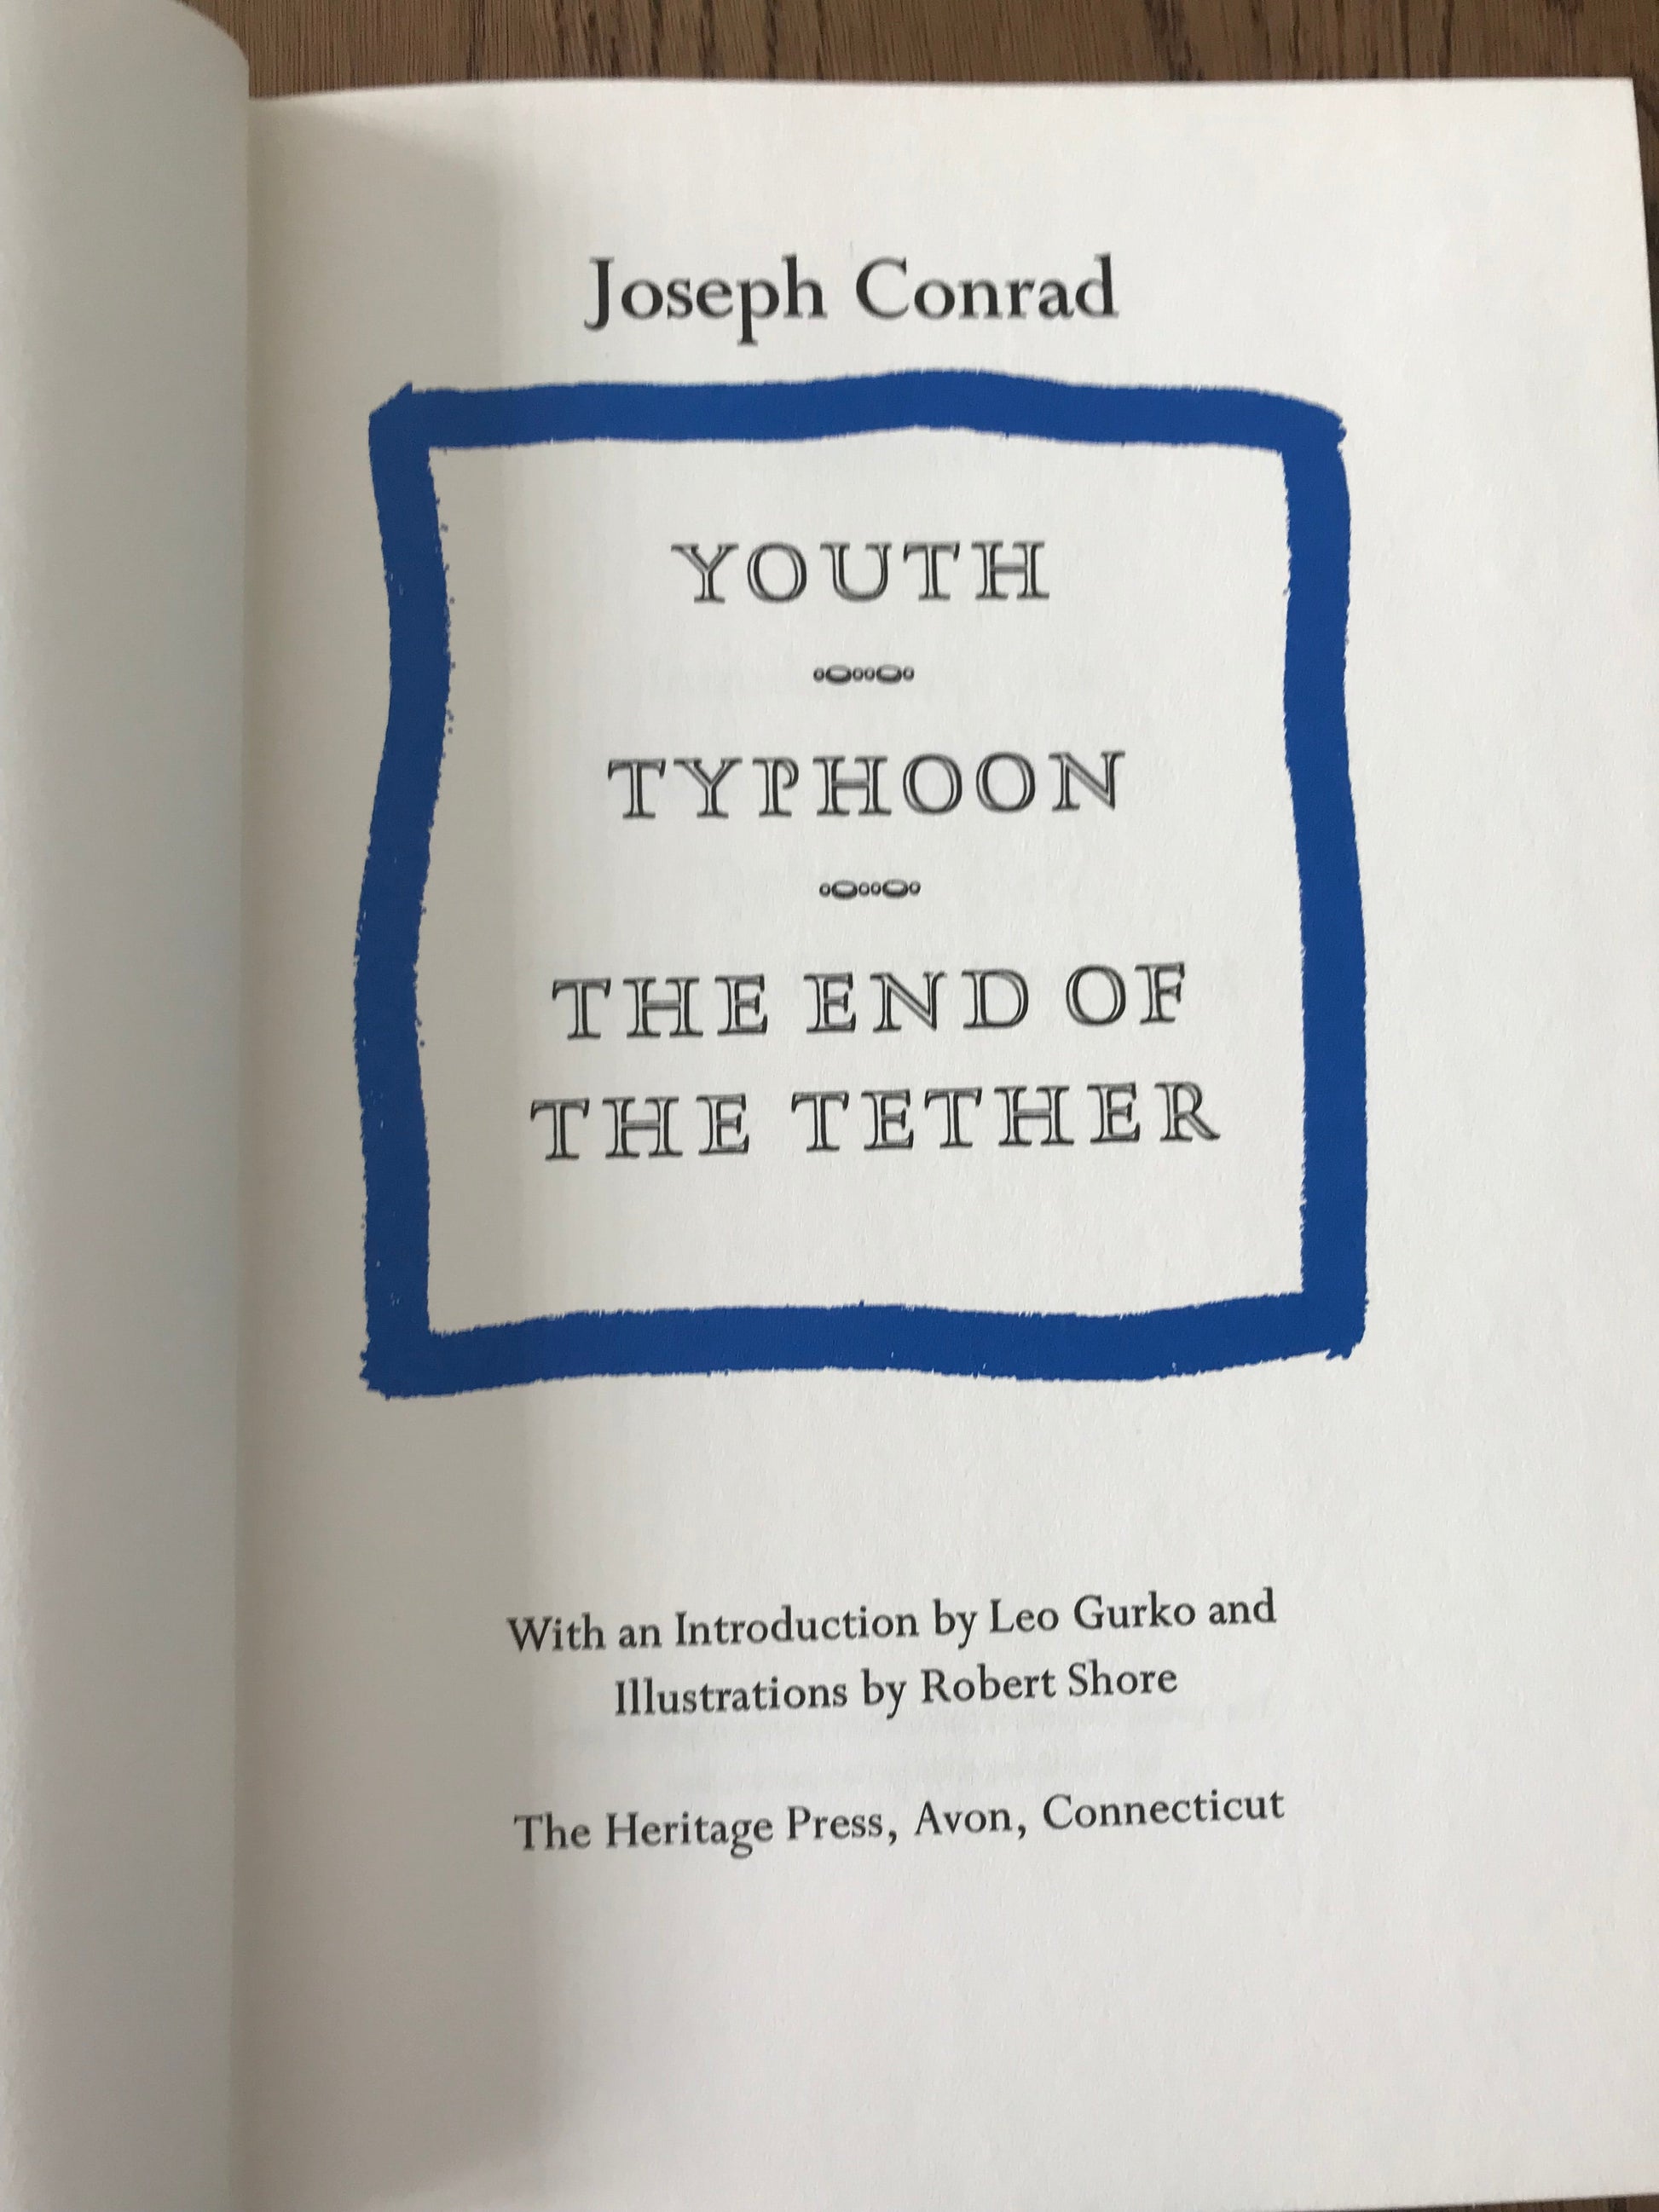 YOUTH - TYPHOON - THE END OF THE TETHER - JOSEPH CONRAD BooksCardsNBikes